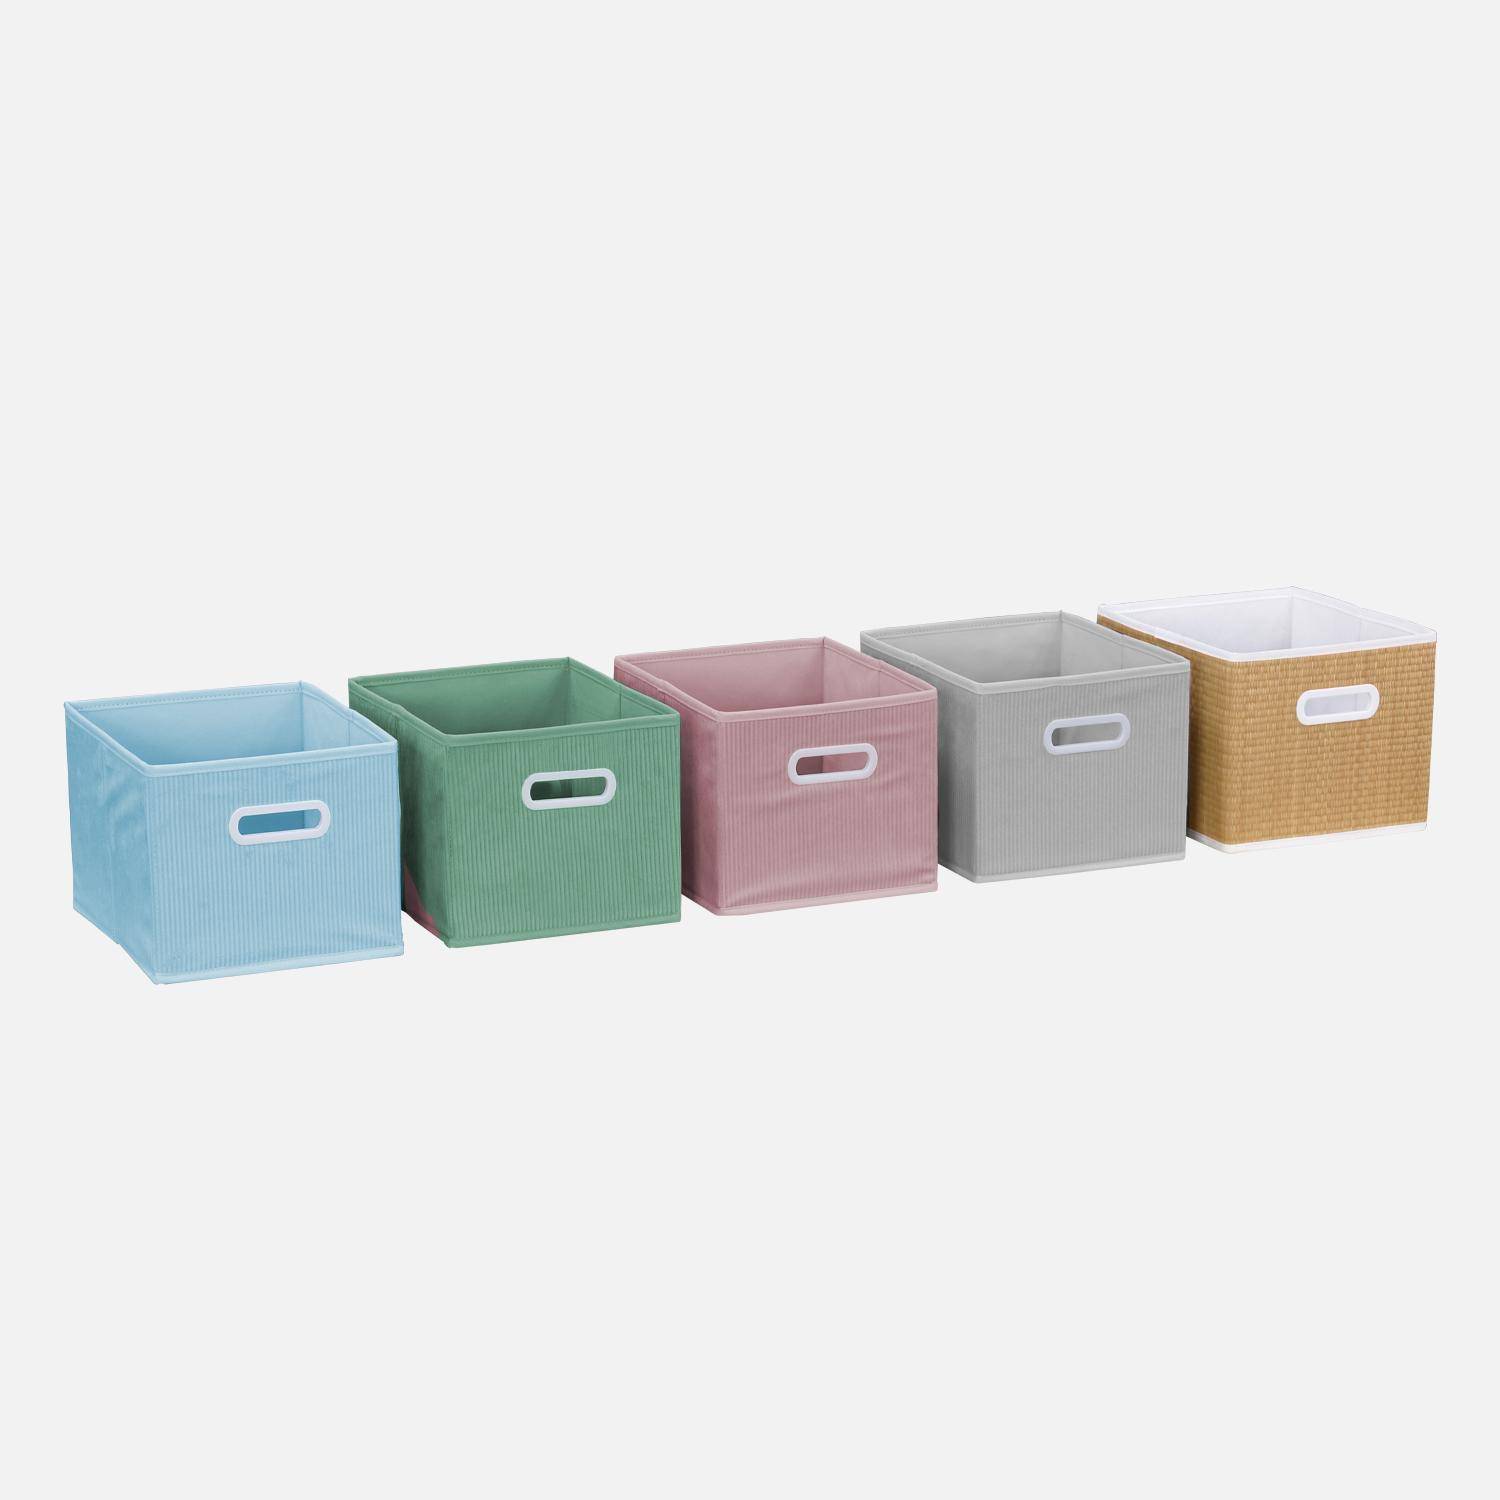 Storage unit for children with 7 compartments and 2 blue and 2 grey velvet baskets,sweeek,Photo4